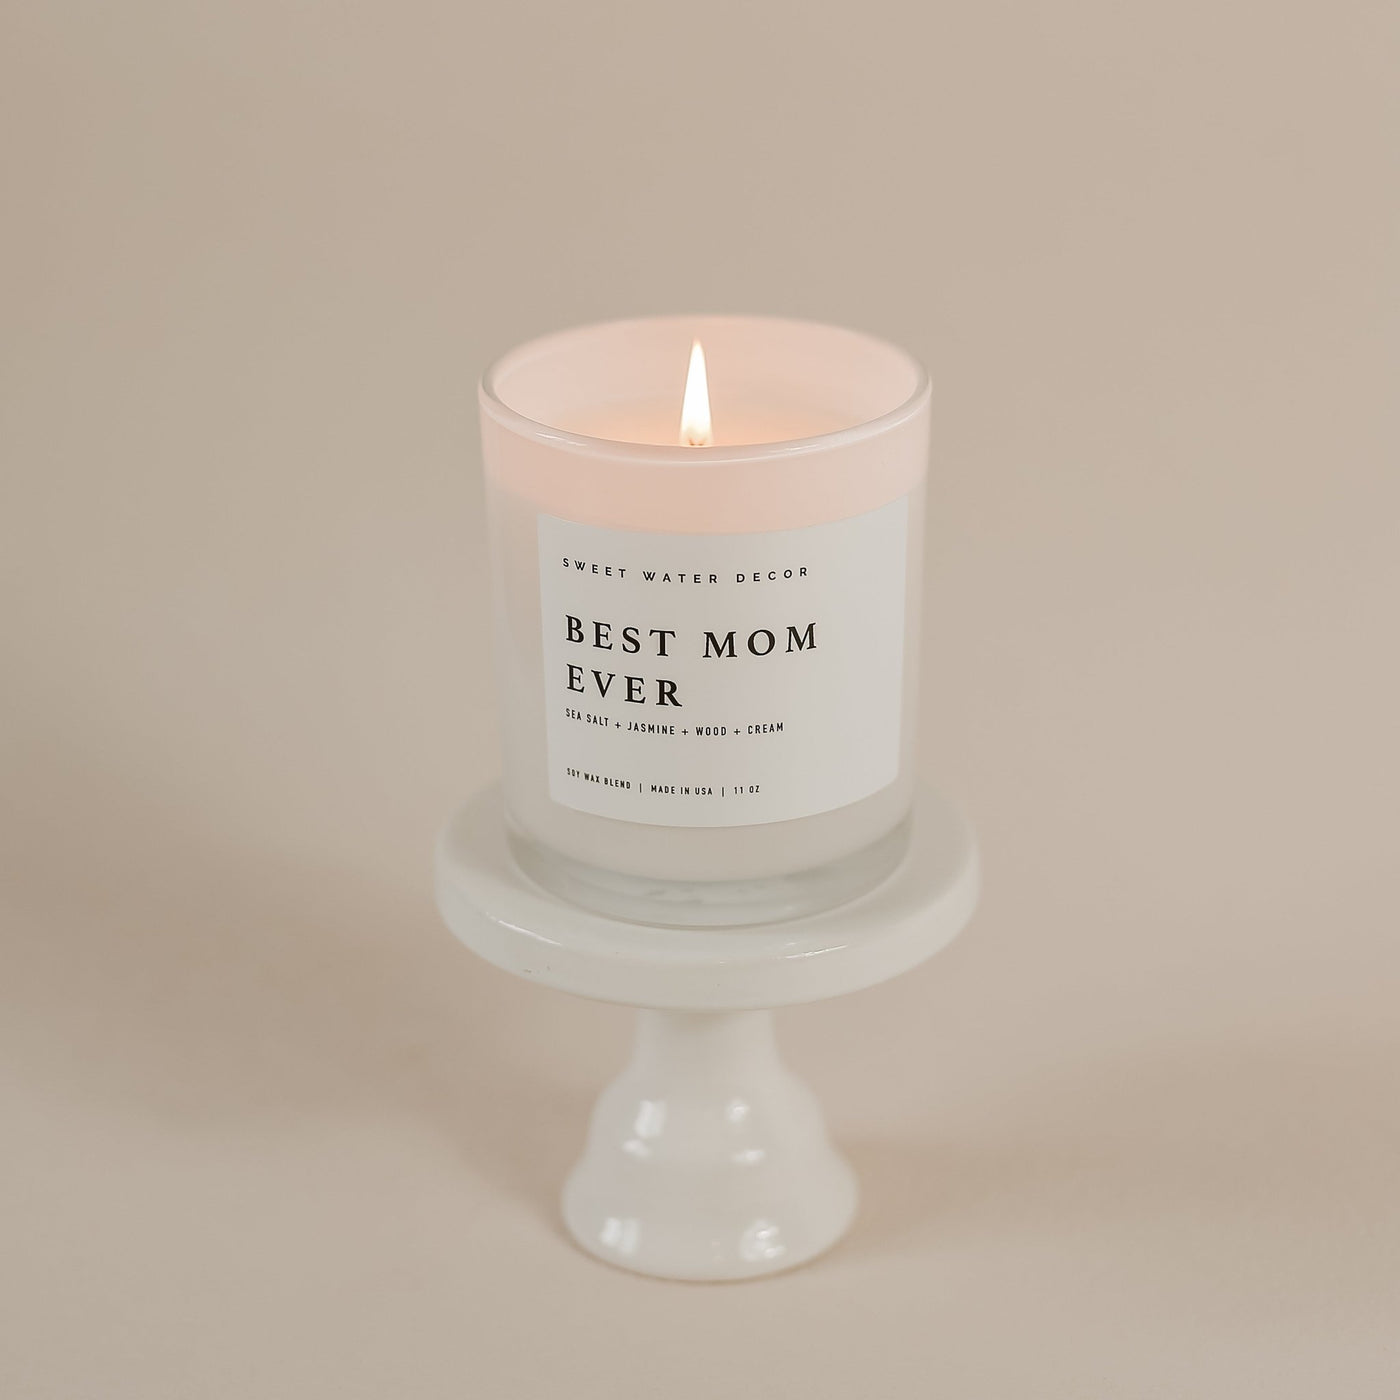 Best Mom Ever! Soy Candle - White Jar - 11 oz - Sweet Water Decor - Candles